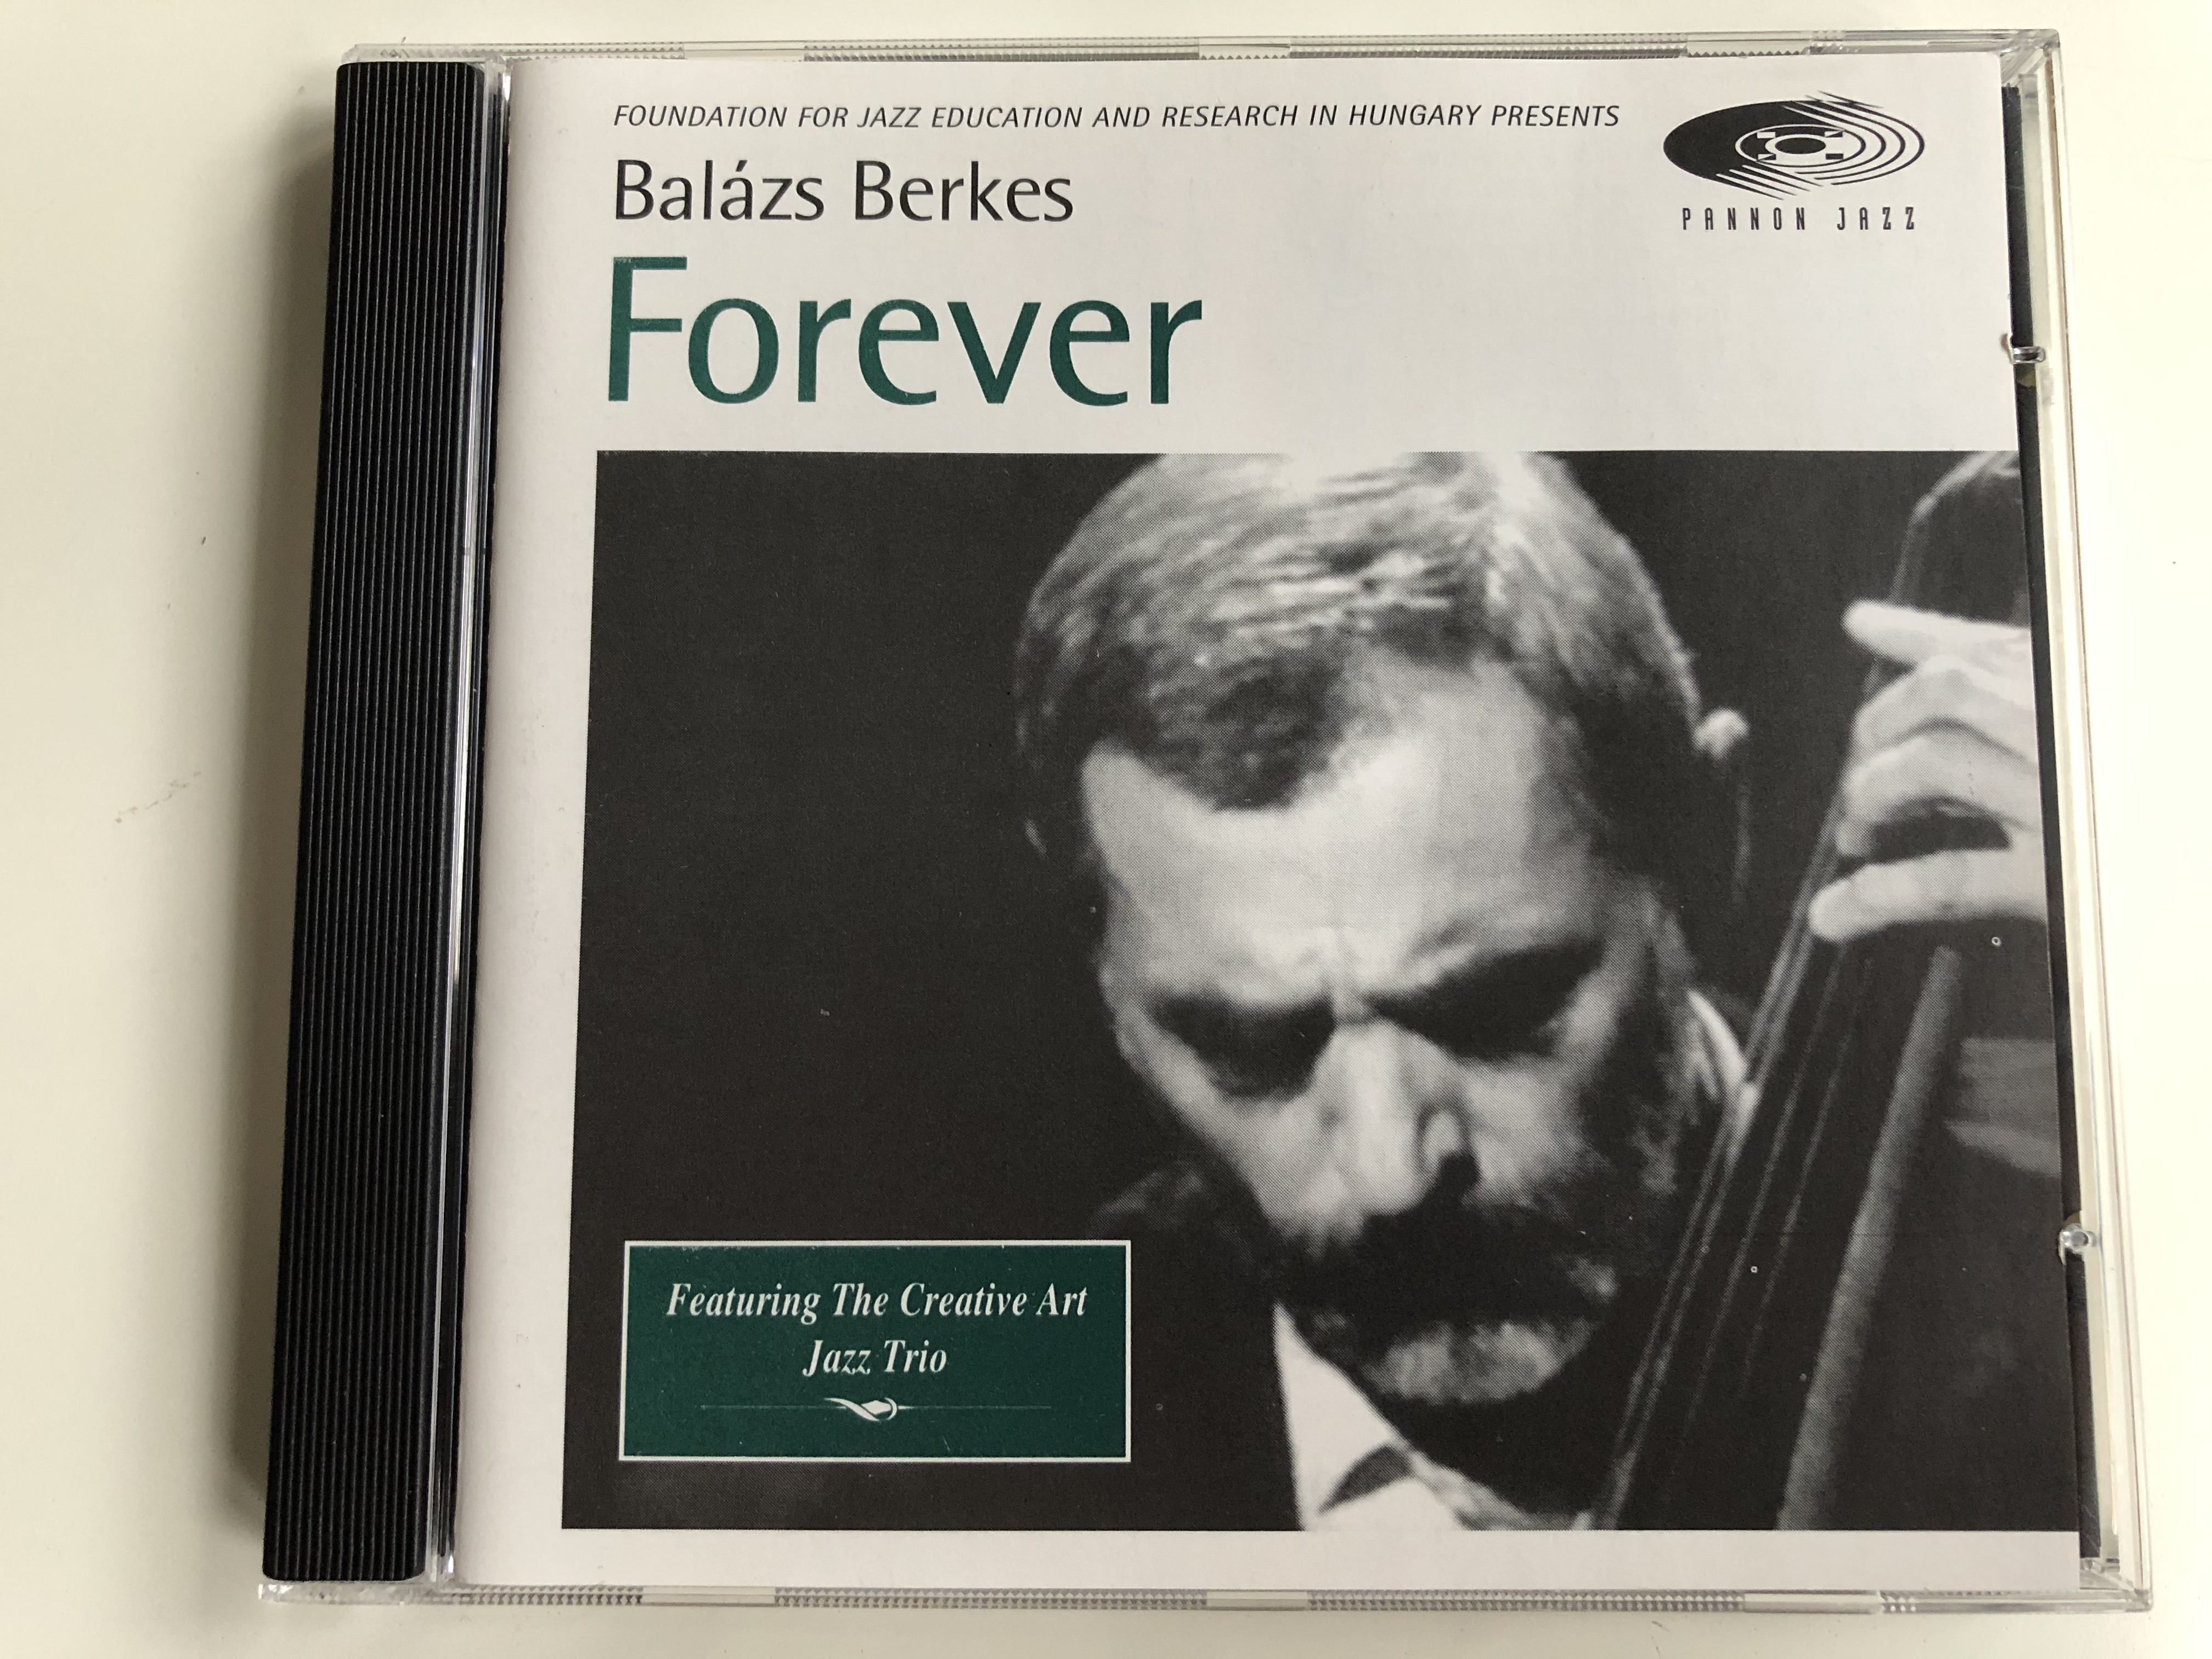 foundation-for-jazz-education-and-resarch-in-hungary-presents-bal-zs-berkes-forever-featuring-the-creative-art-jazz-trio-pannon-jazz-audio-cd-1996-pj-1016-1-.jpg